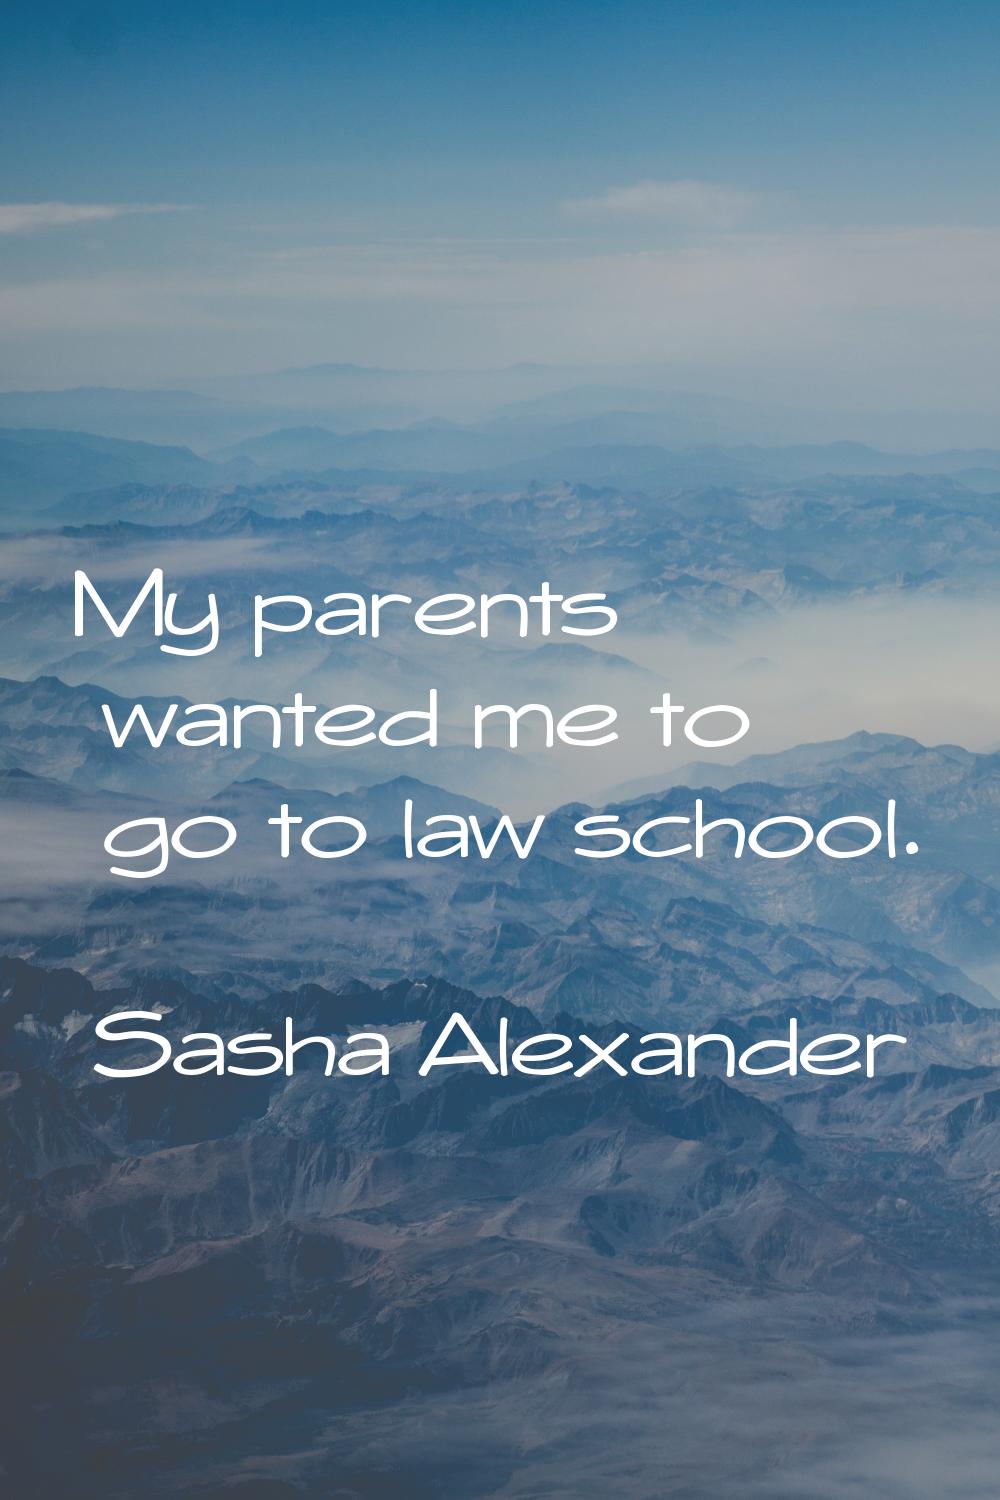 My parents wanted me to go to law school.